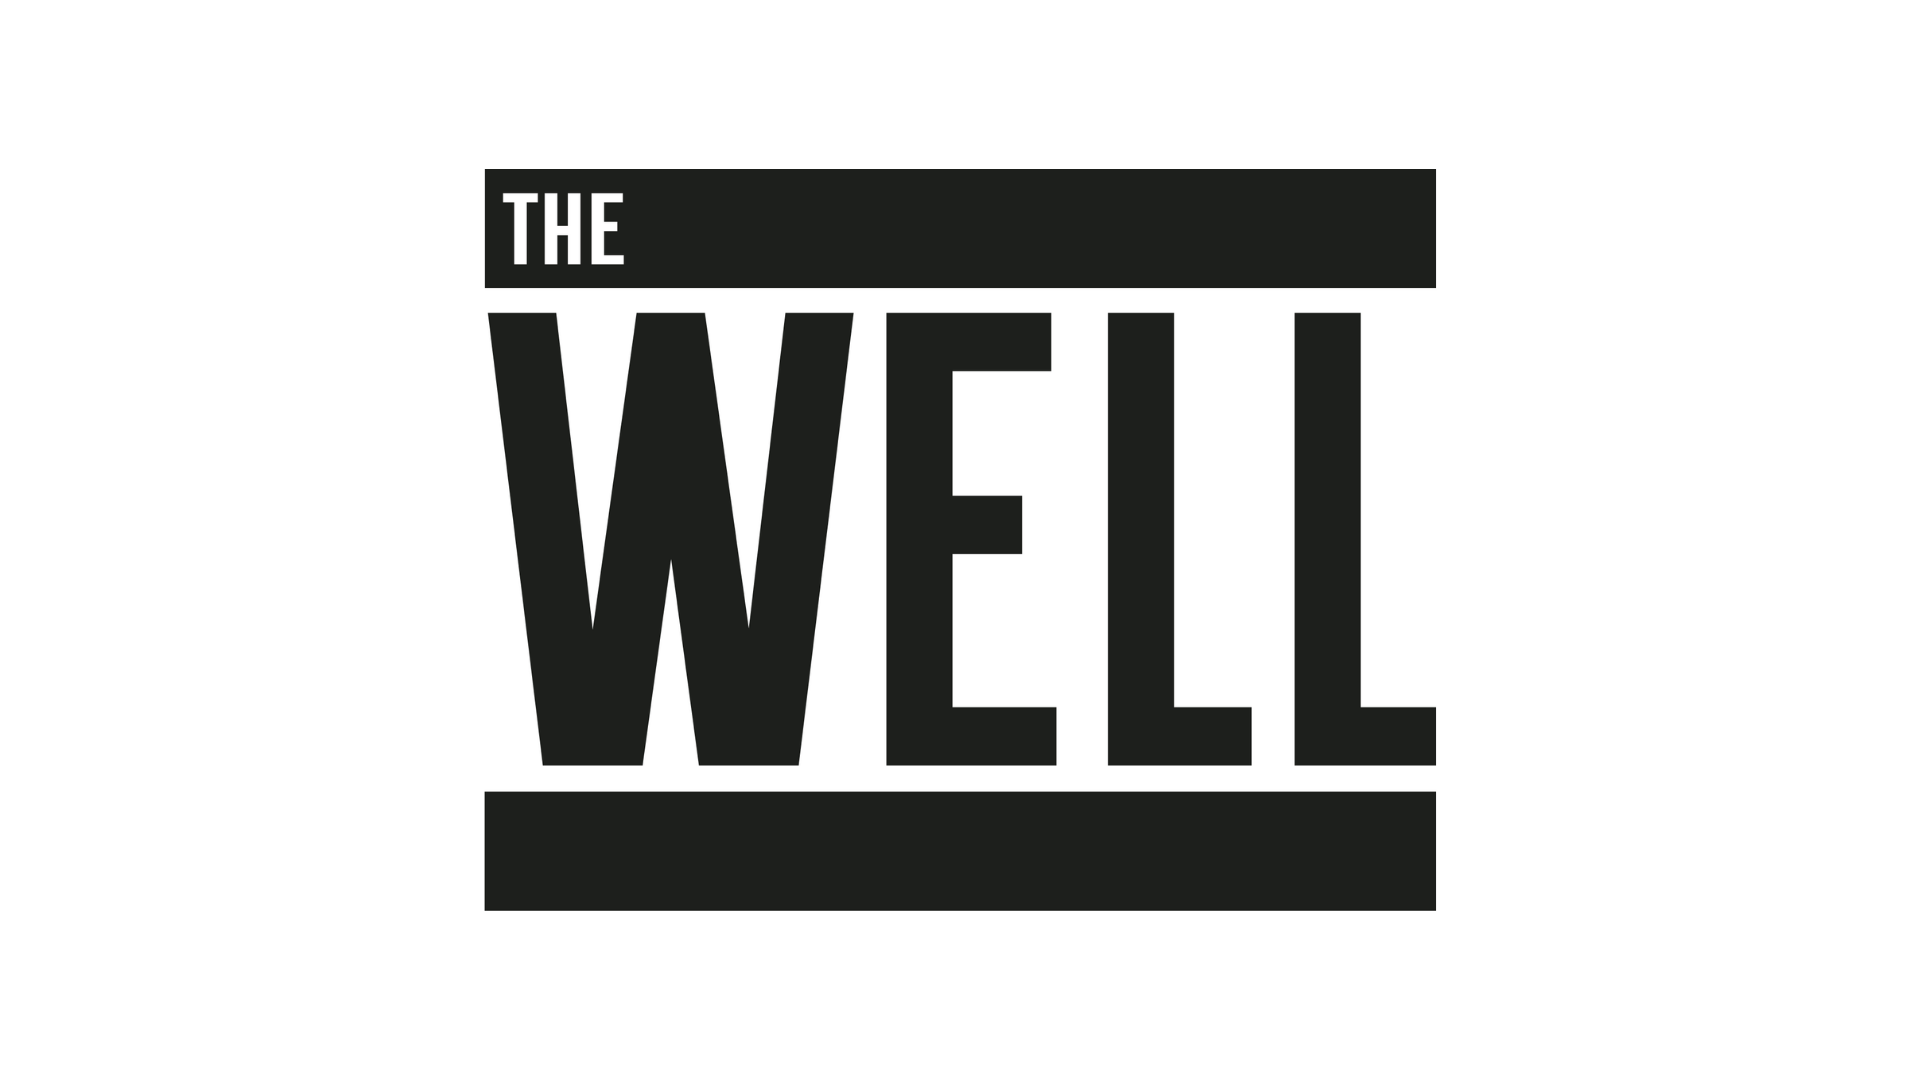 'The Well' is written in black with a horizontal bar appearing below it.